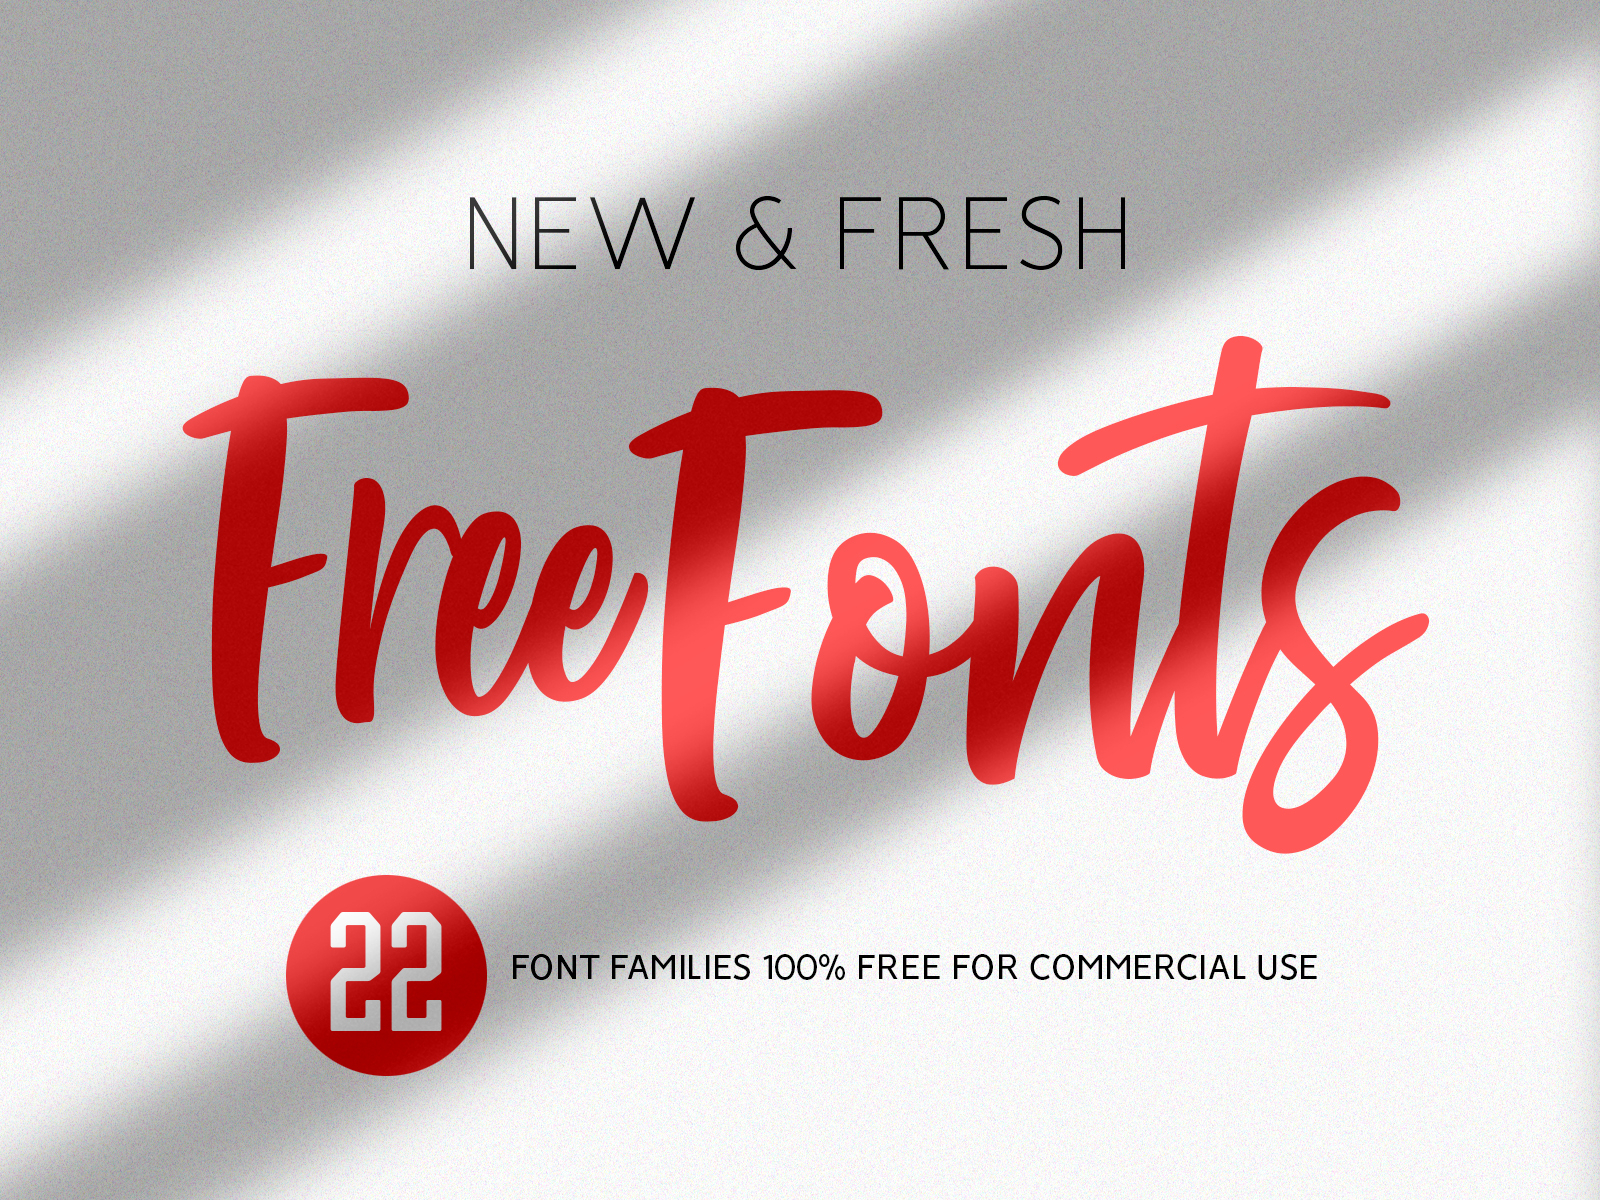 Free Fonts - New & Fresh Fonts by Graphic Design Junction on Dribbble